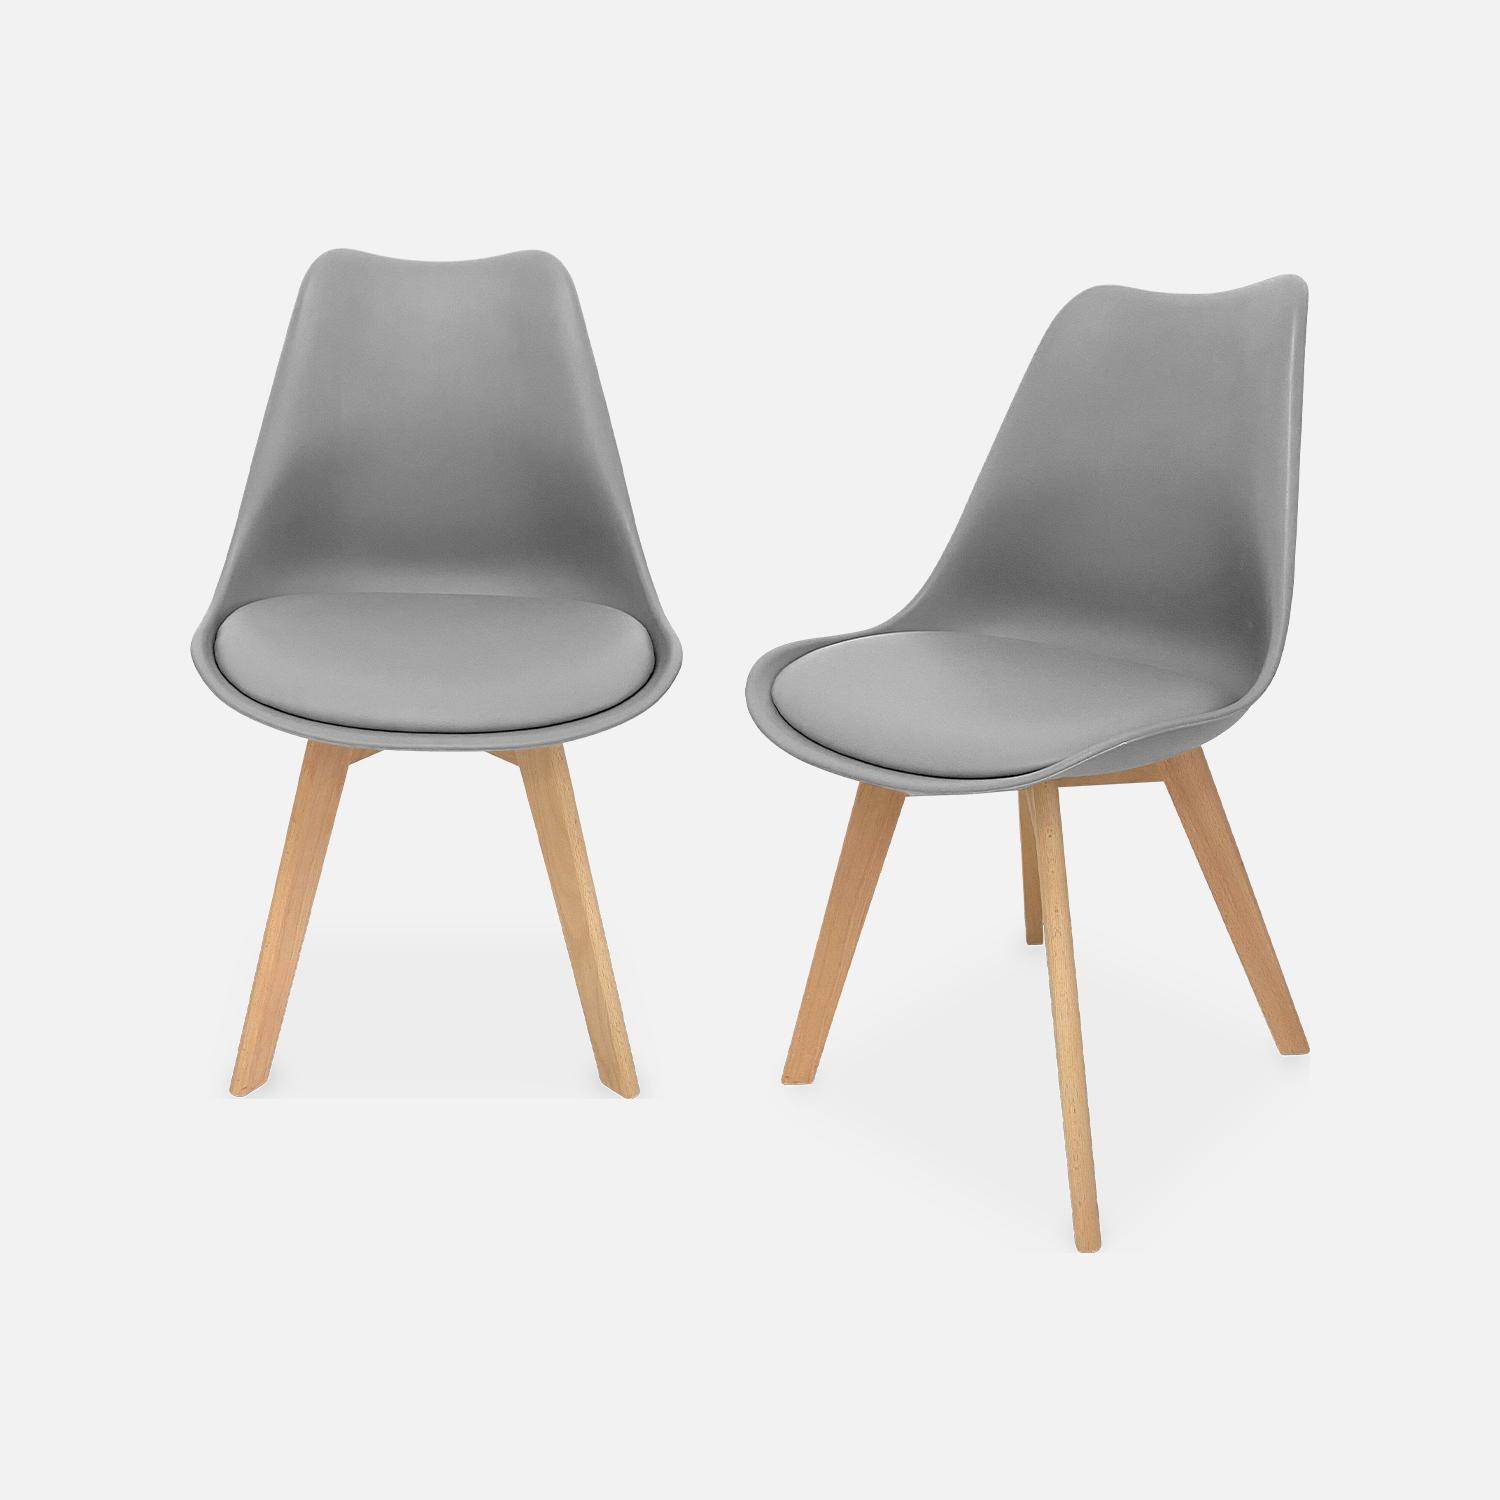 Pair of scandi-style dining chairs, grey, L49xD55xH81cm, NILS Photo1